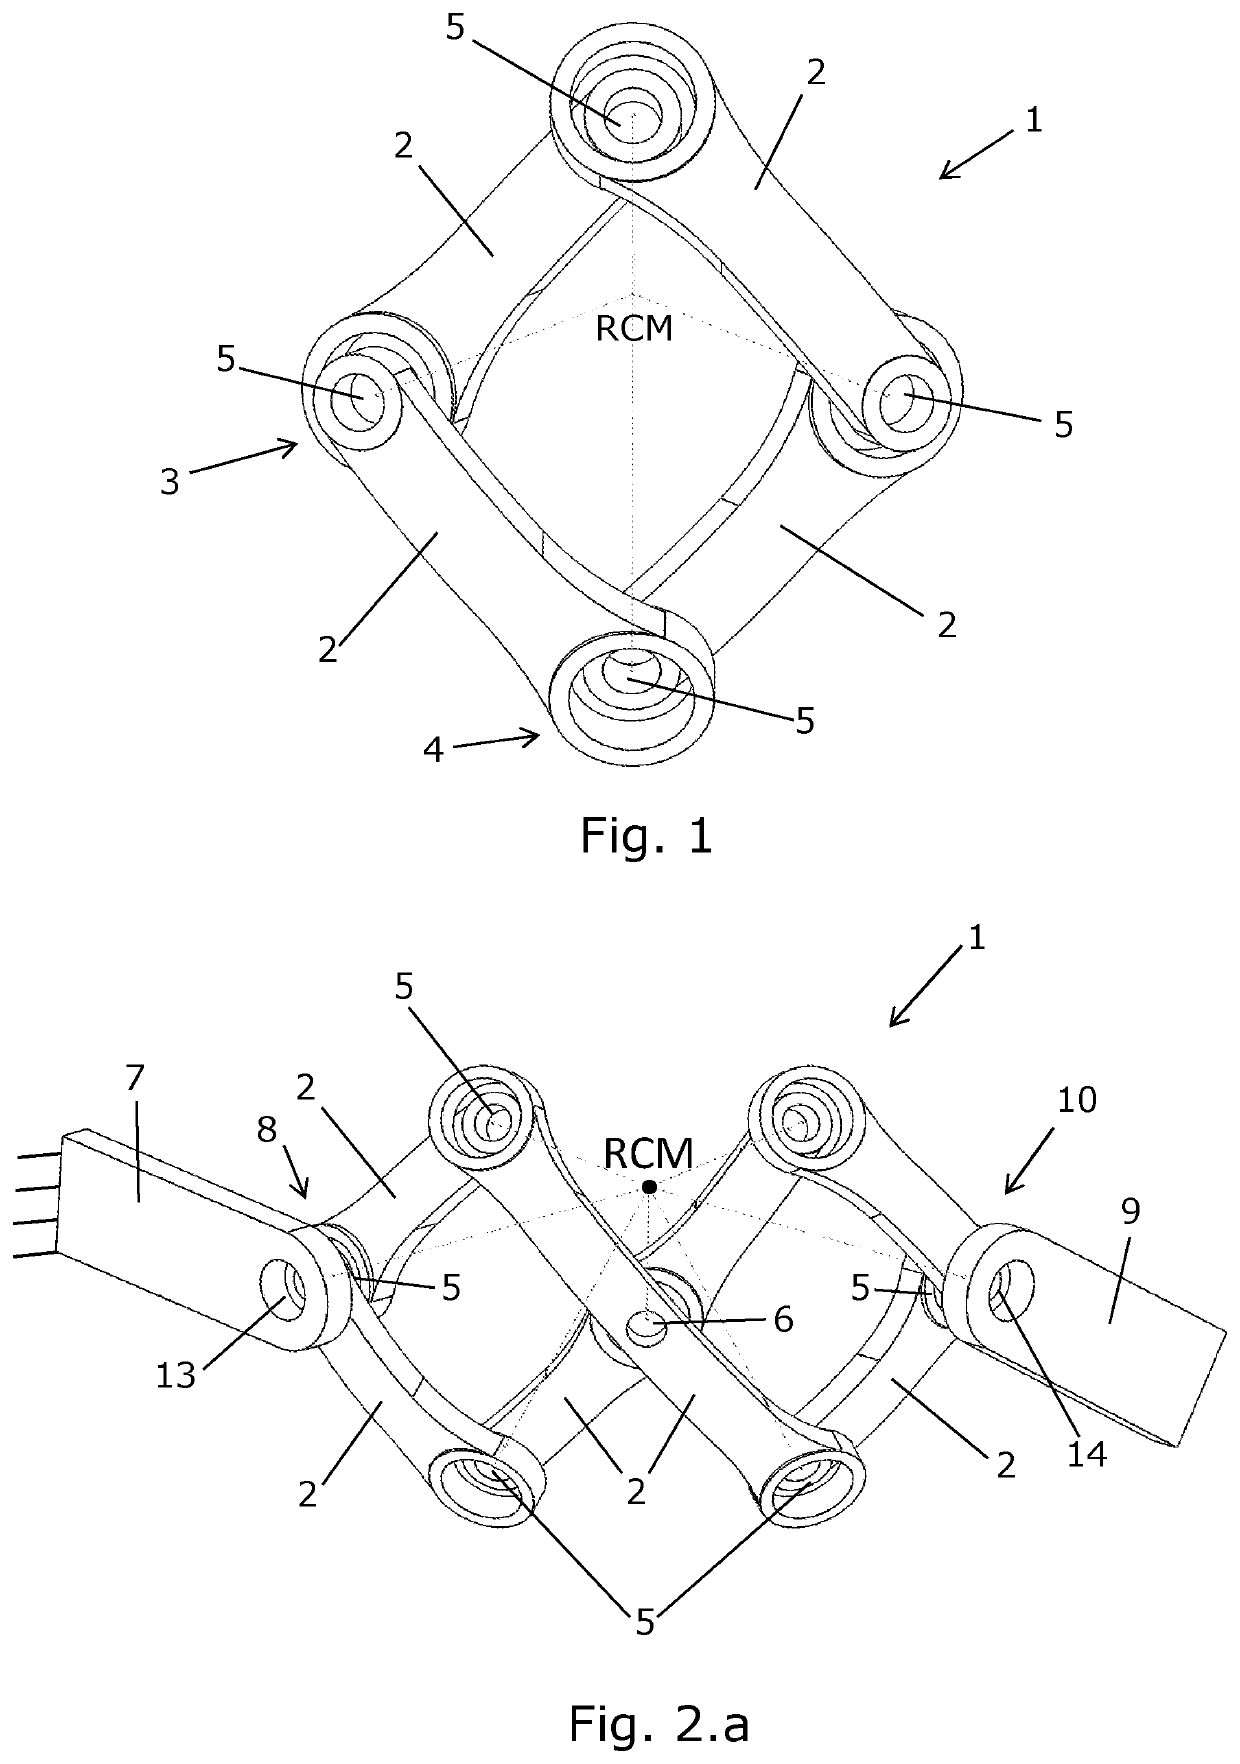 Compact spherical 3-dof mechanism constructed with scissor linkages